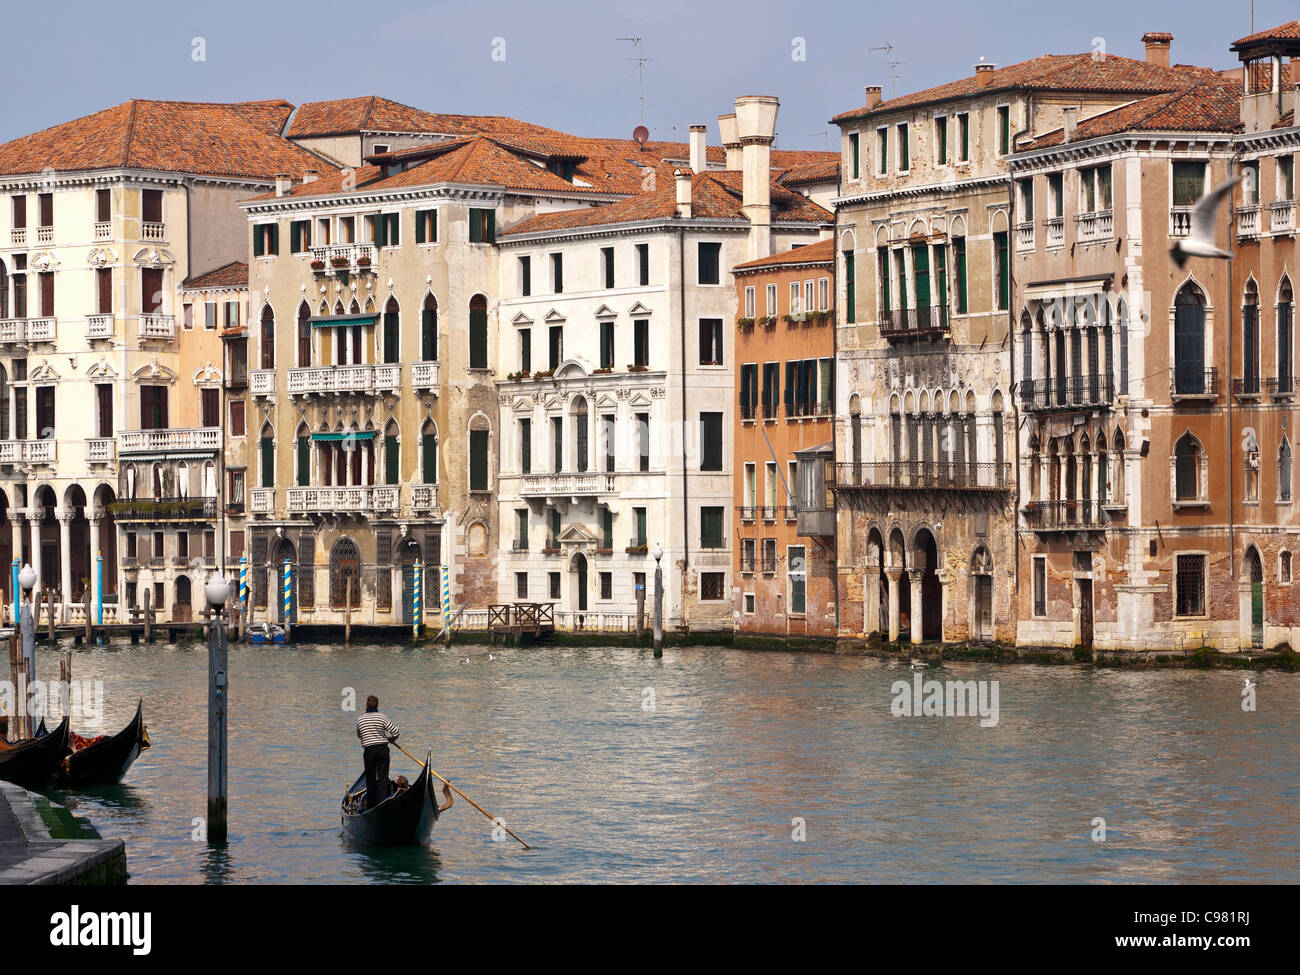 View across the Grand Canal in Venice, with the Locanda ai Santi Apostoli (a small hotel in a palace) on the left. Stock Photo